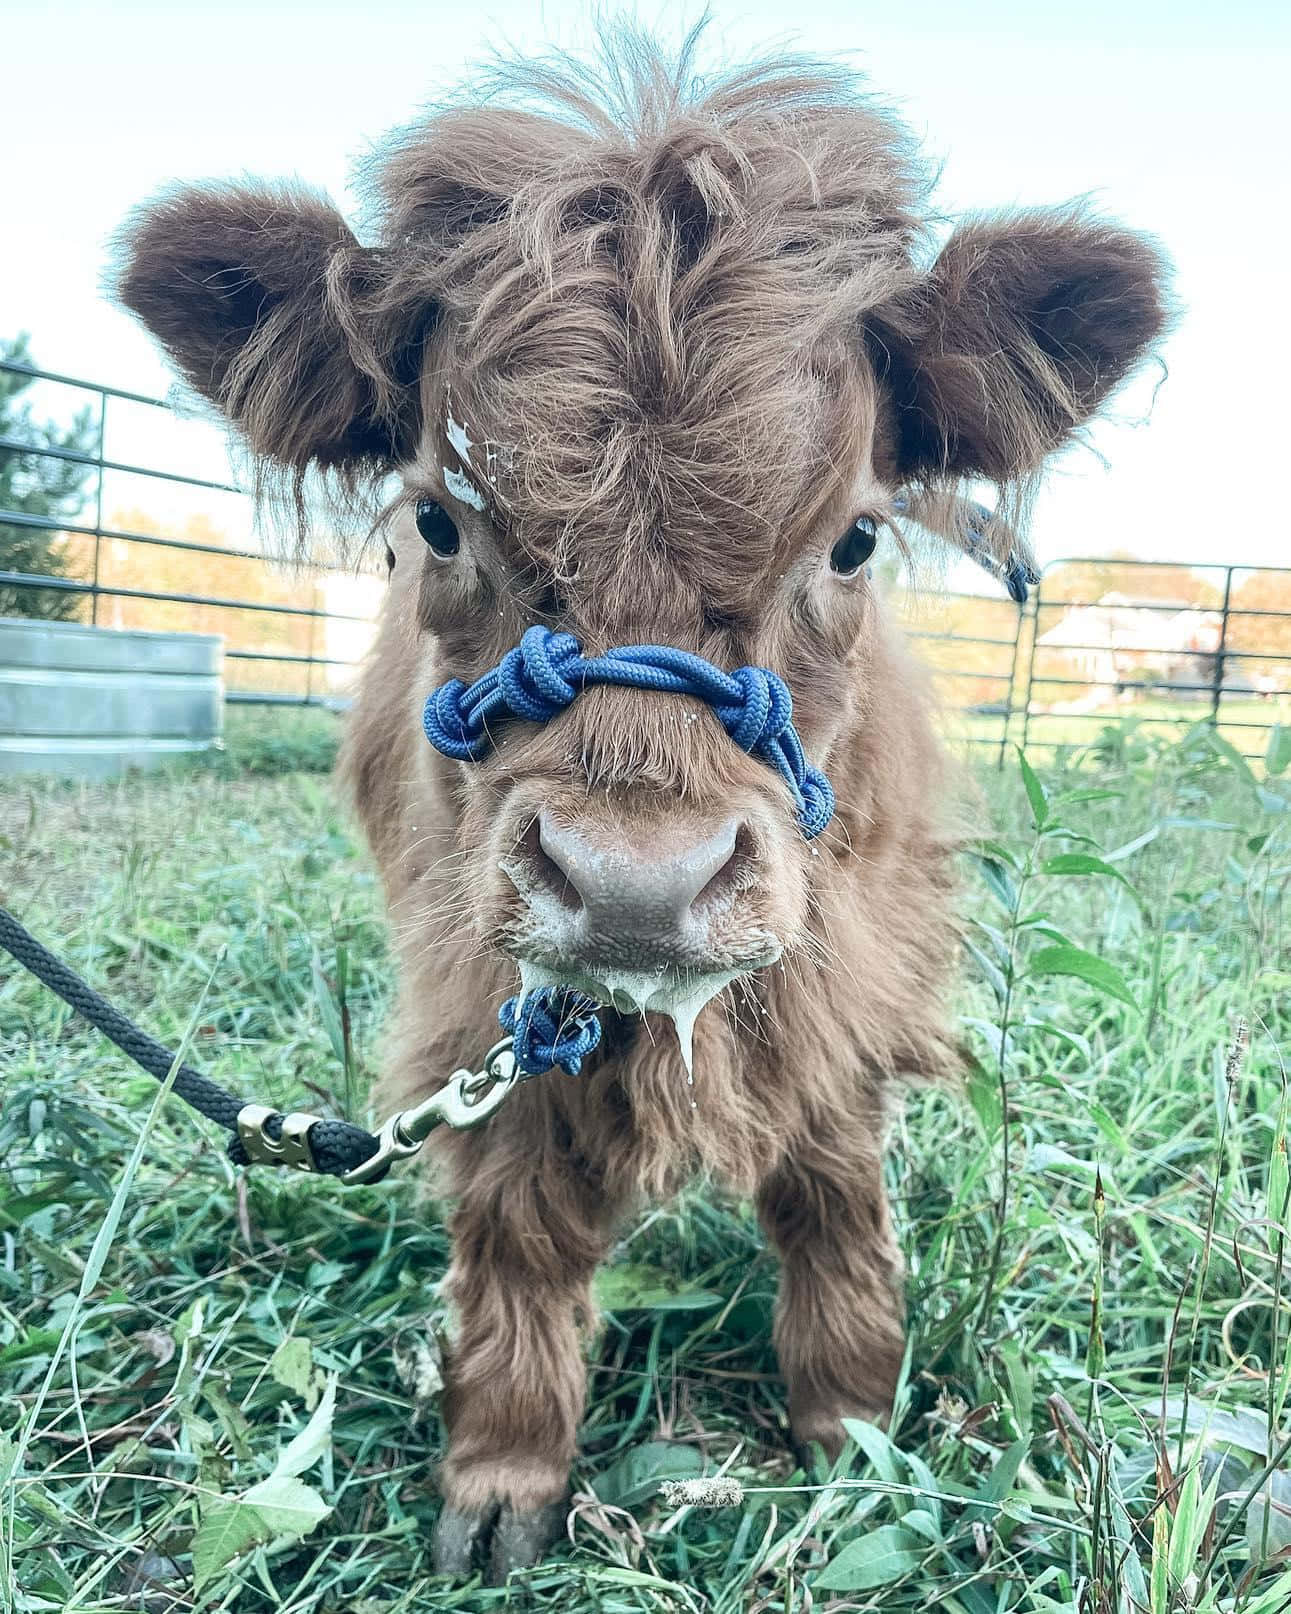 A Baby Calf Is Standing In A Field With A Leash